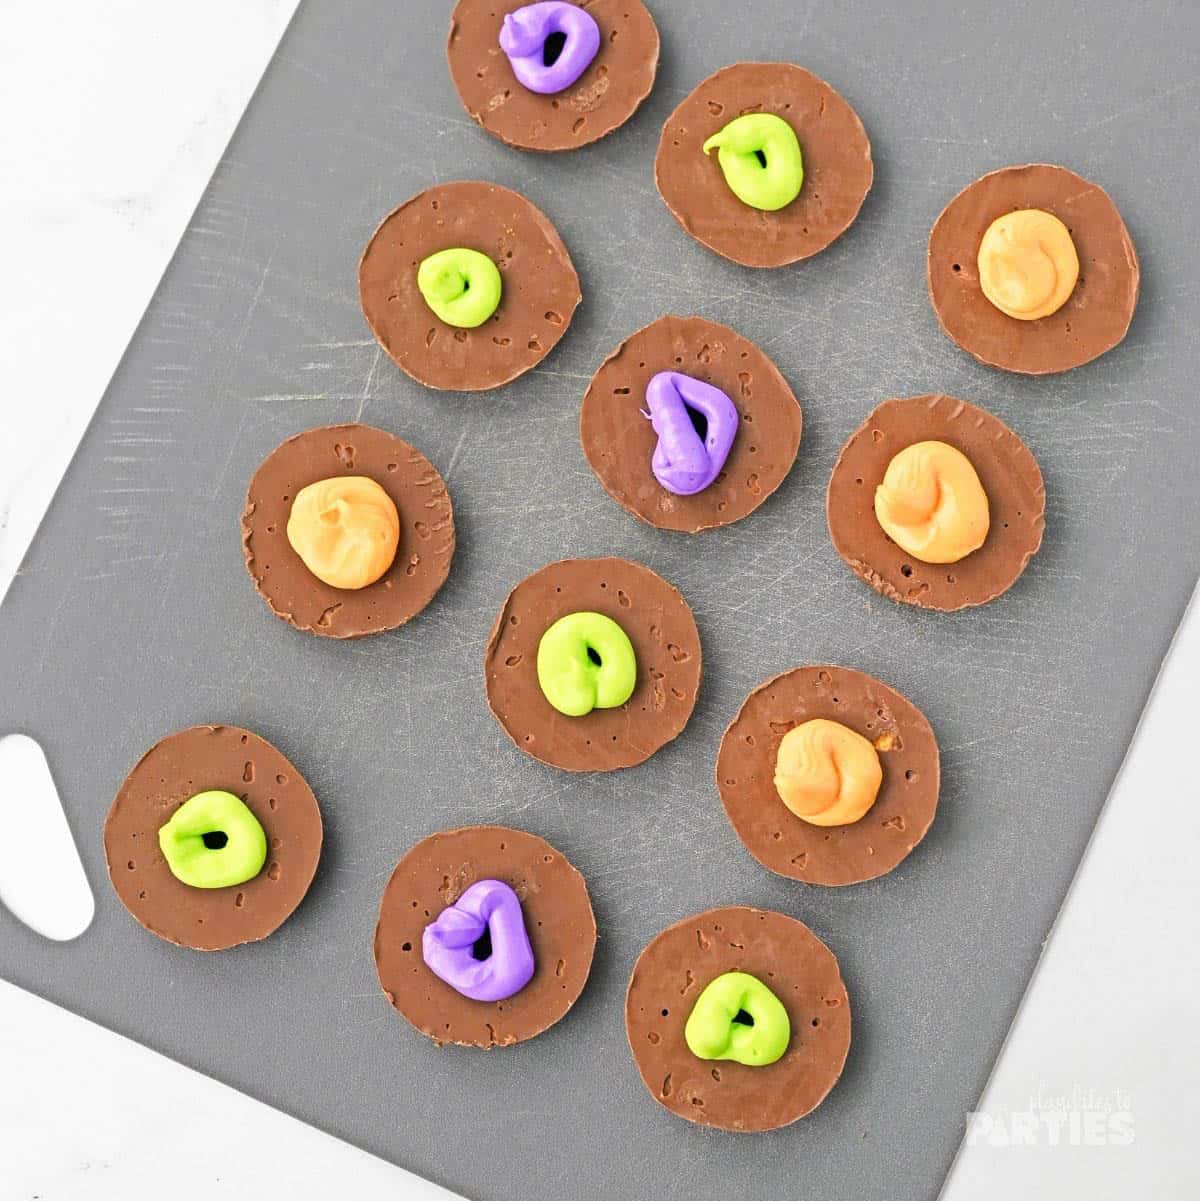 Colorful icing piped onto the bottom of chocolate covered cookies.